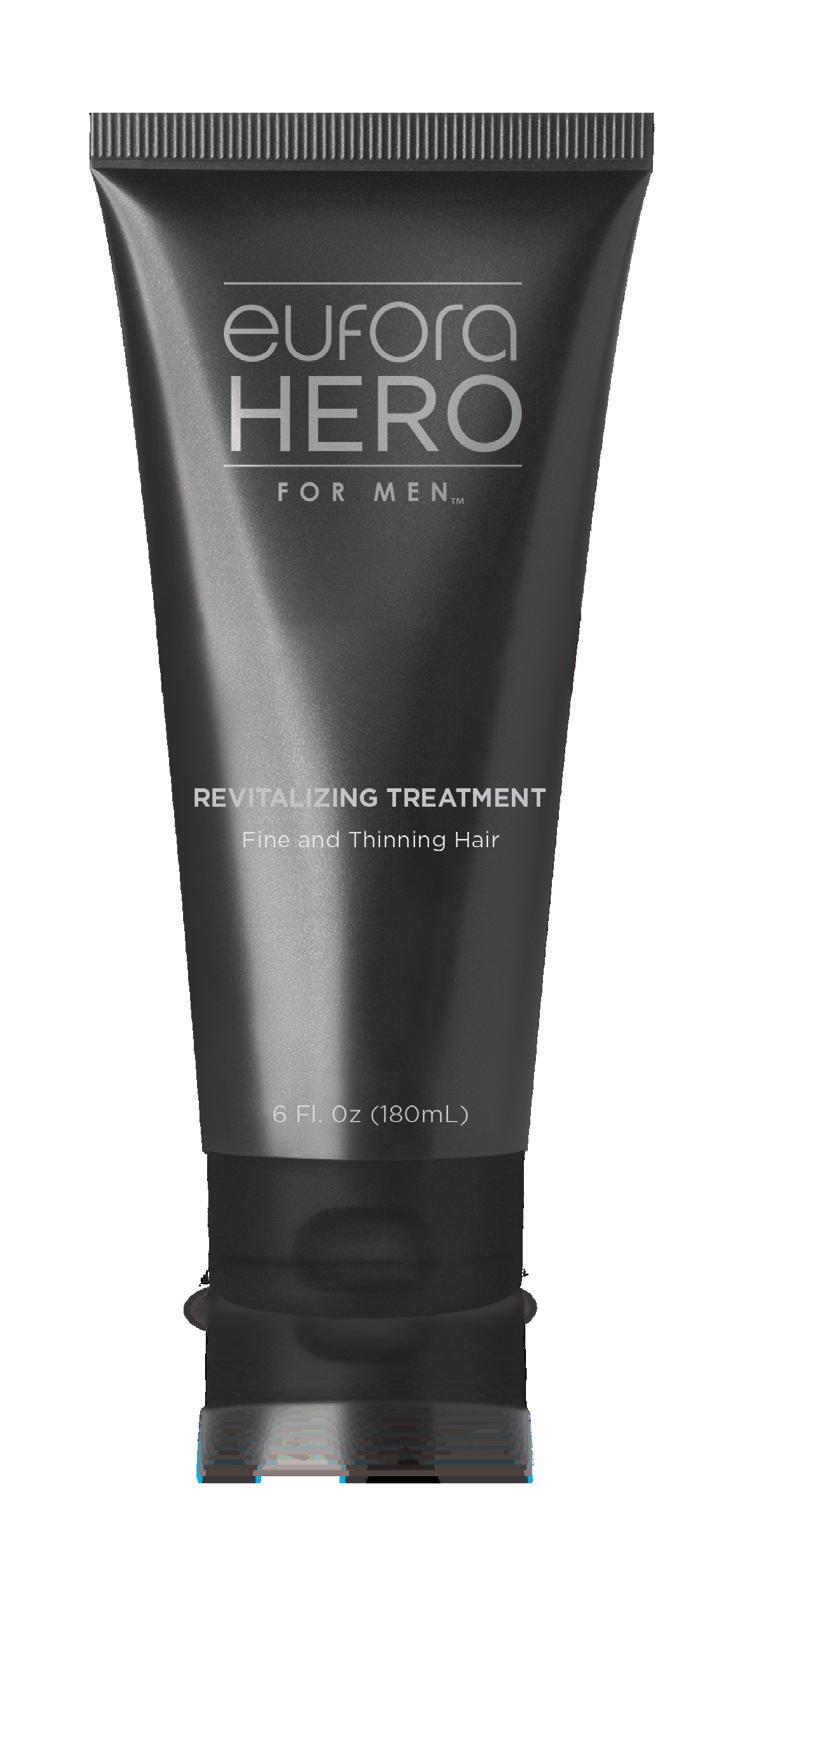 REVITALIZING TREATMENT A conditioning treatment that soothes irritation, strengthens and conditions hair and scalp.